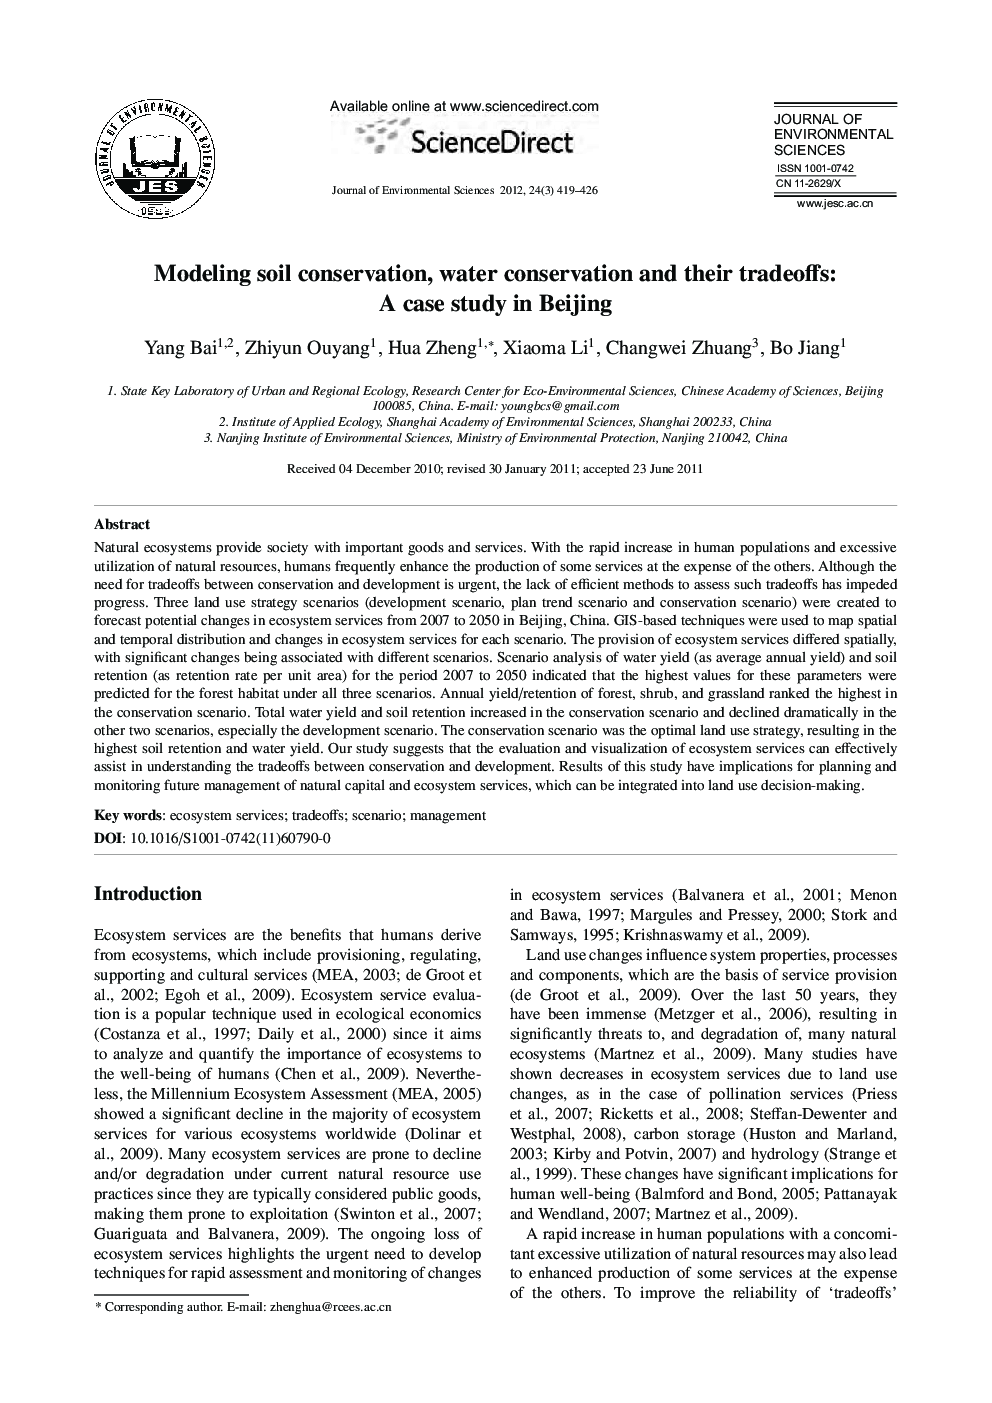 Modeling soil conservation, water conservation and their tradeoffs: A case study in Beijing